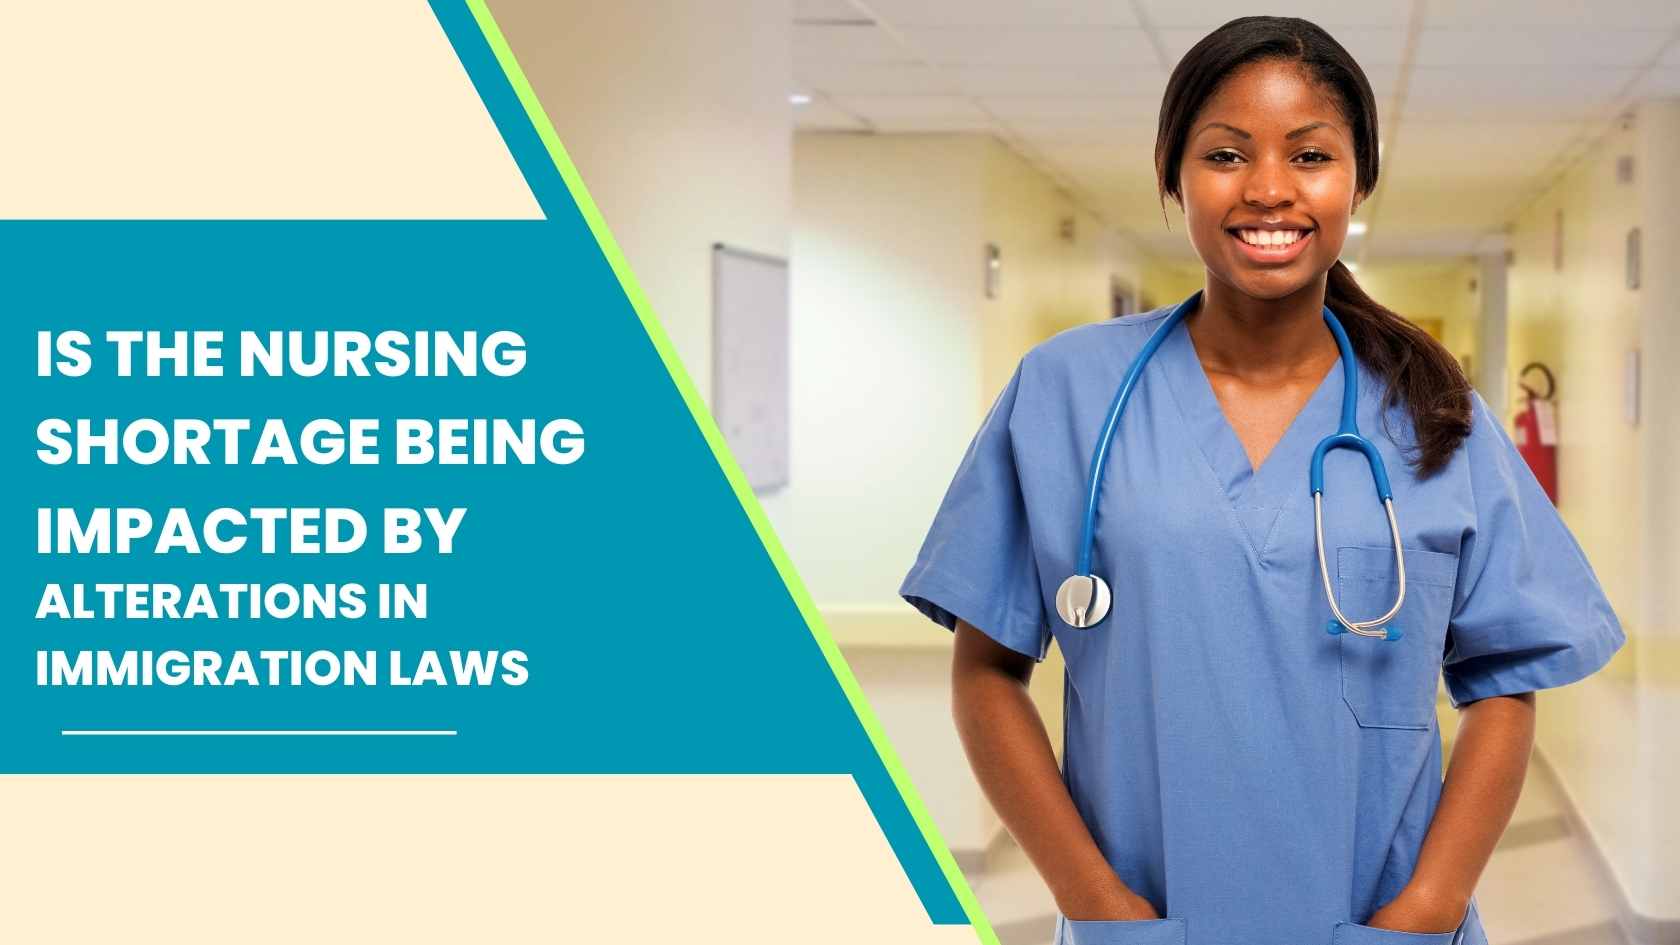 Is the Nursing Shortage Being Impacted by Alterations in Immigration Laws